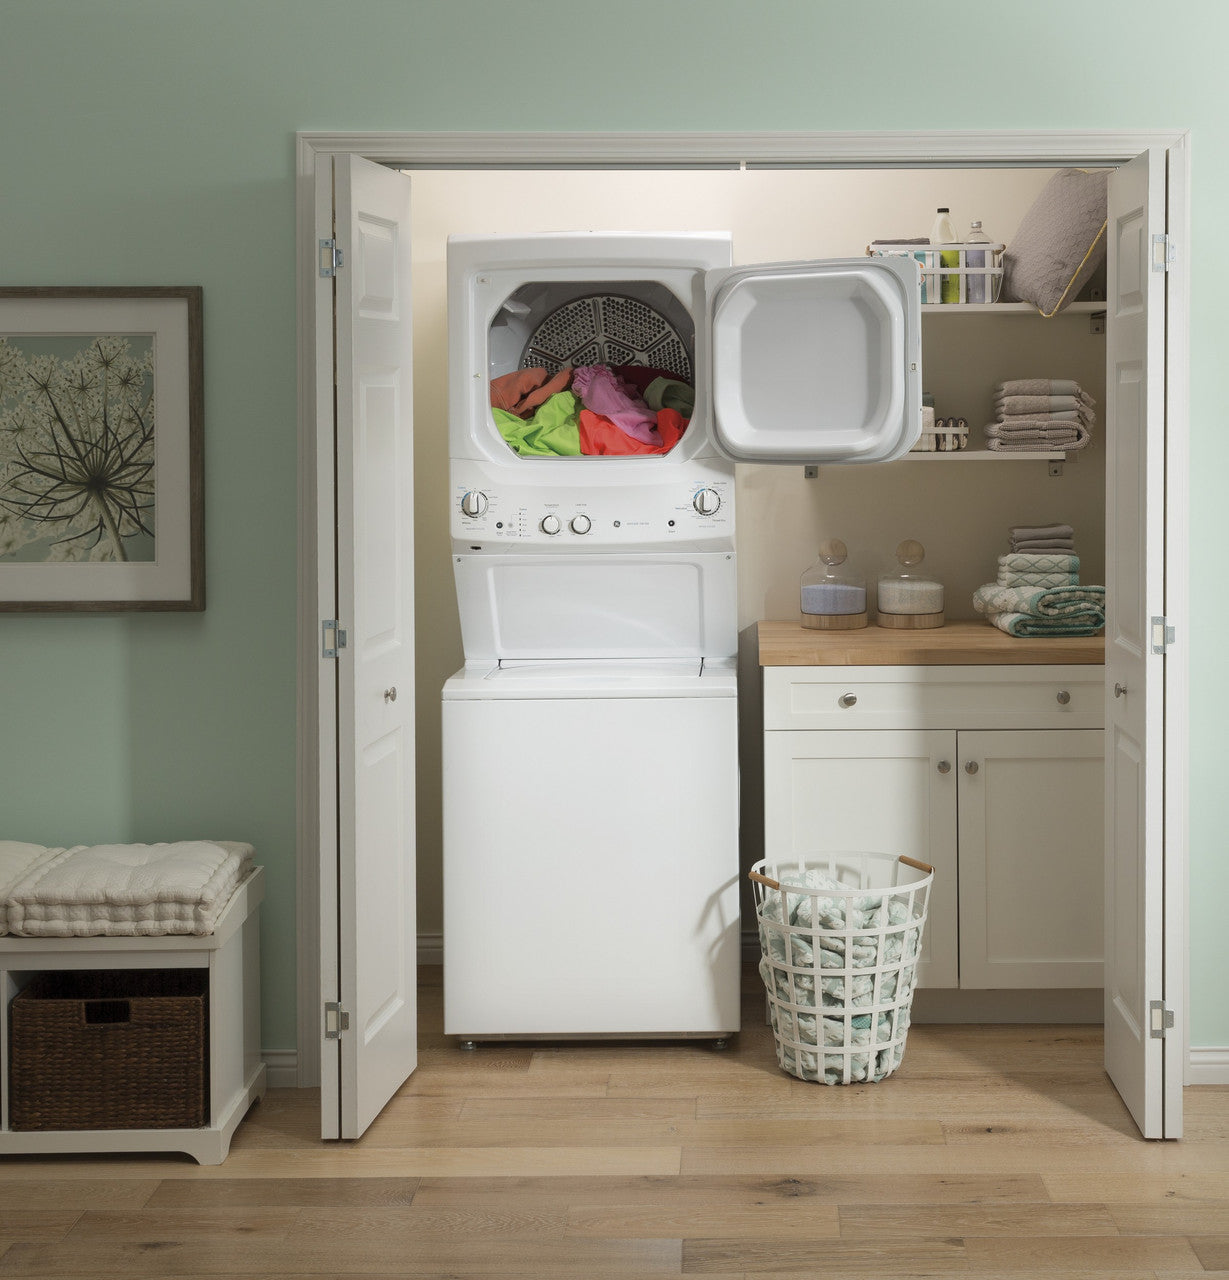 GE - 2.3 cu. Ft. Washer and 4.4 cu. Ft. Dryer Unitized Spacemaker Laundry Stacker - GUD24GSSMWW